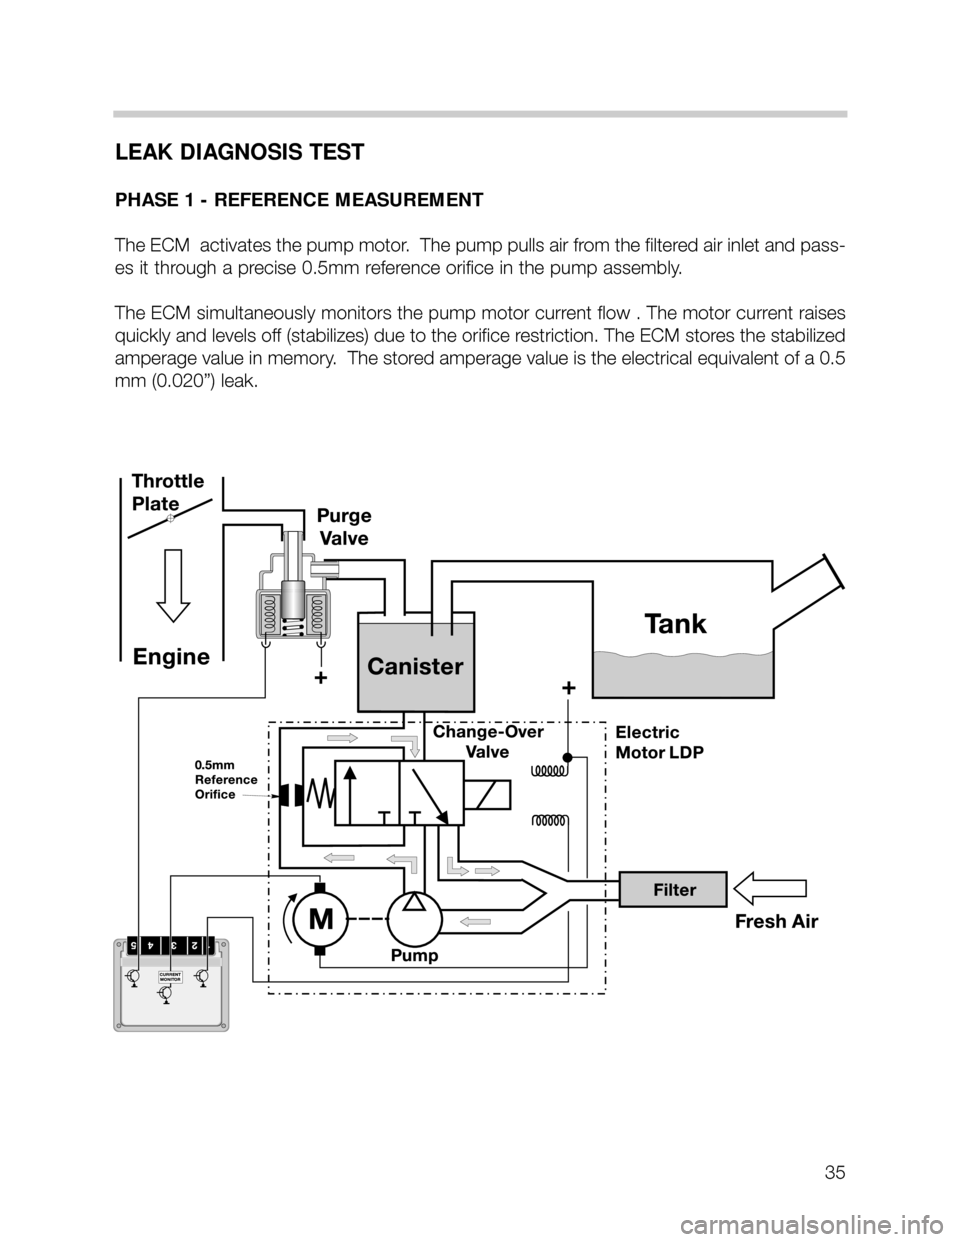 BMW 540i 2001 E39 M62TU Engine Owners Guide LEAK DIAGNOSIS TEST
PHASE 1 - REFERENCE MEASUREMENT
The ECM  activates the pump motor.  The pump pulls air from the filtered air inlet and pass-
es it through a precise 0.5mm reference orifice in the 